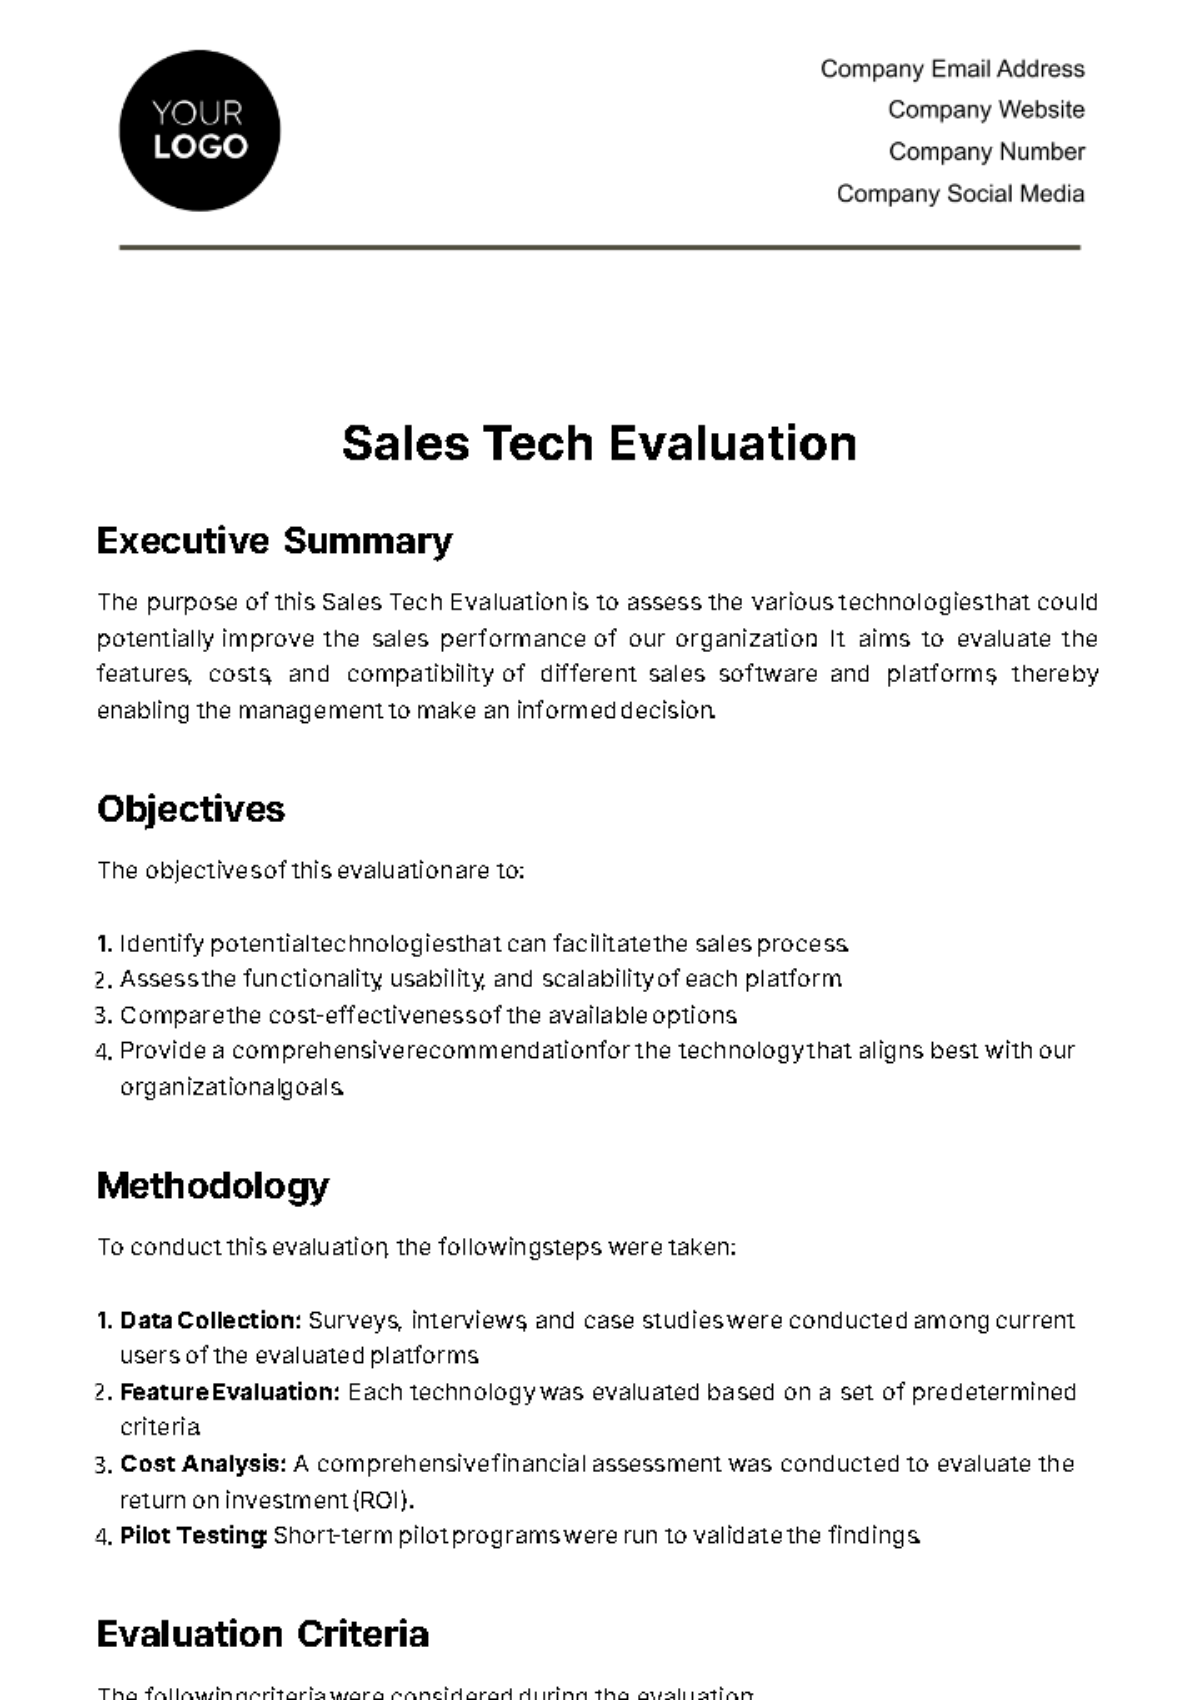 Free Sales Tech Evaluation Template